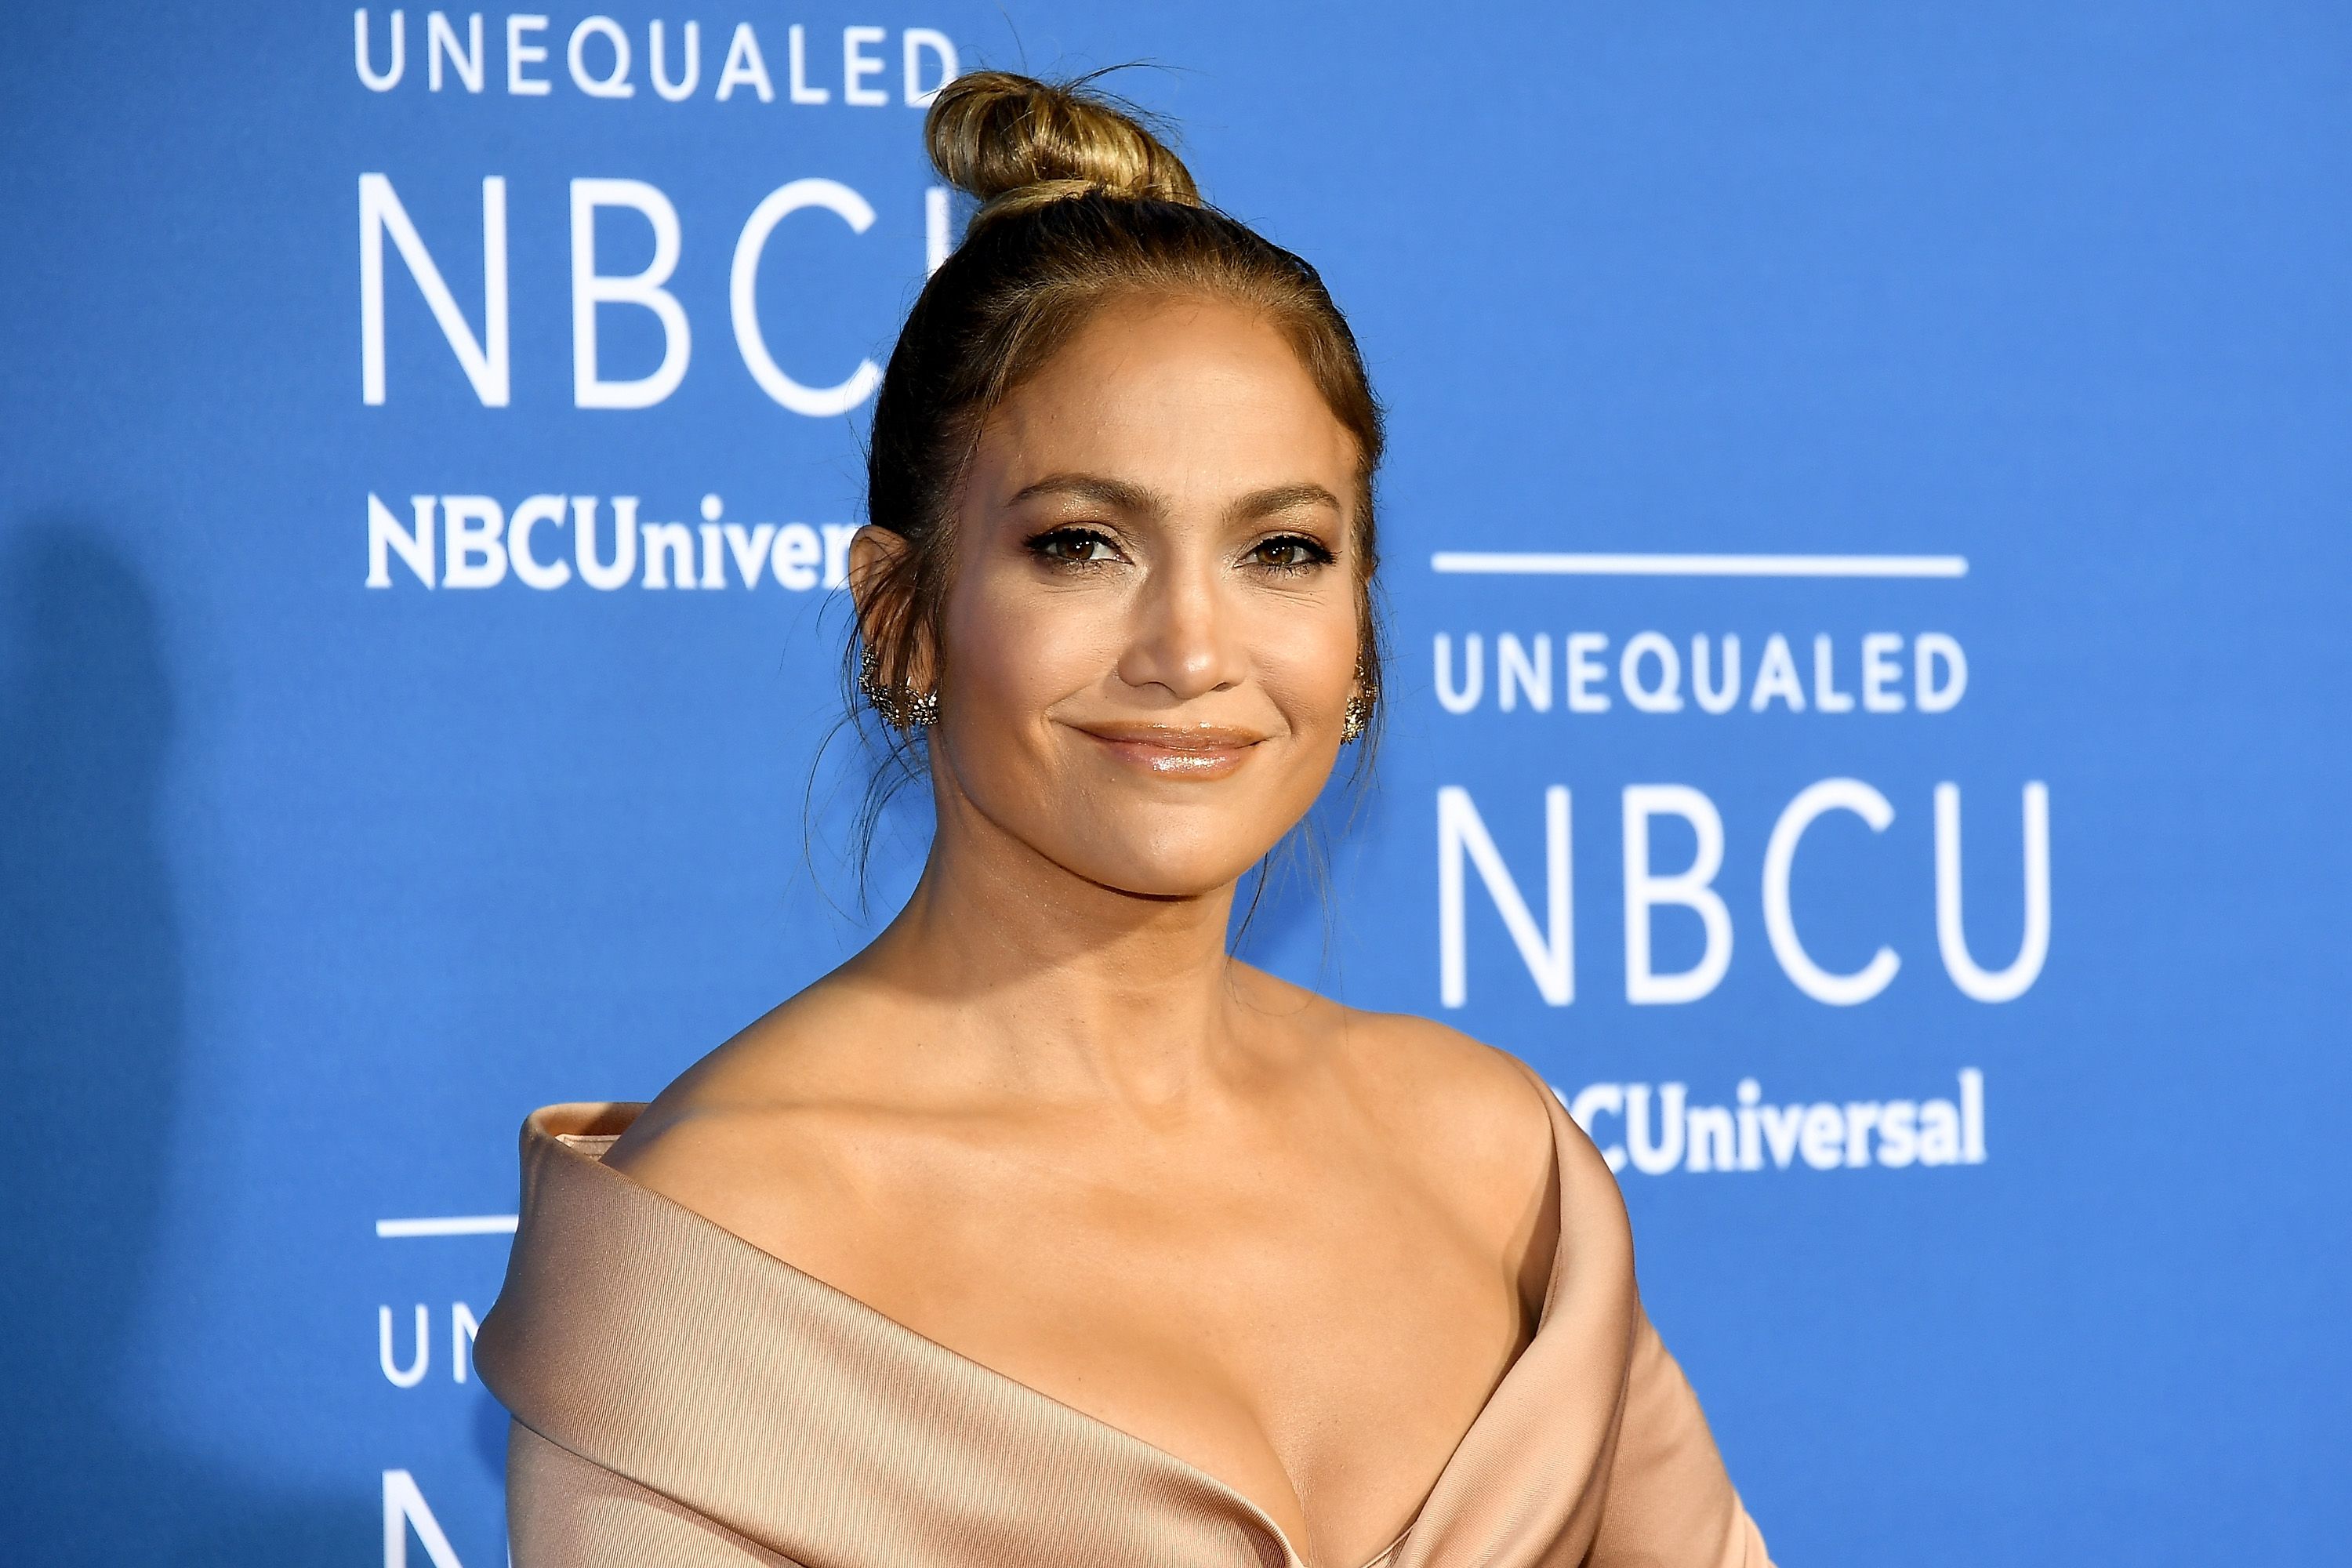 Jennifer Lopez attends the 2017 NBCUniversal Upfront at Radio City Music Hall on May 15, 2017 | Photo: Getty Images